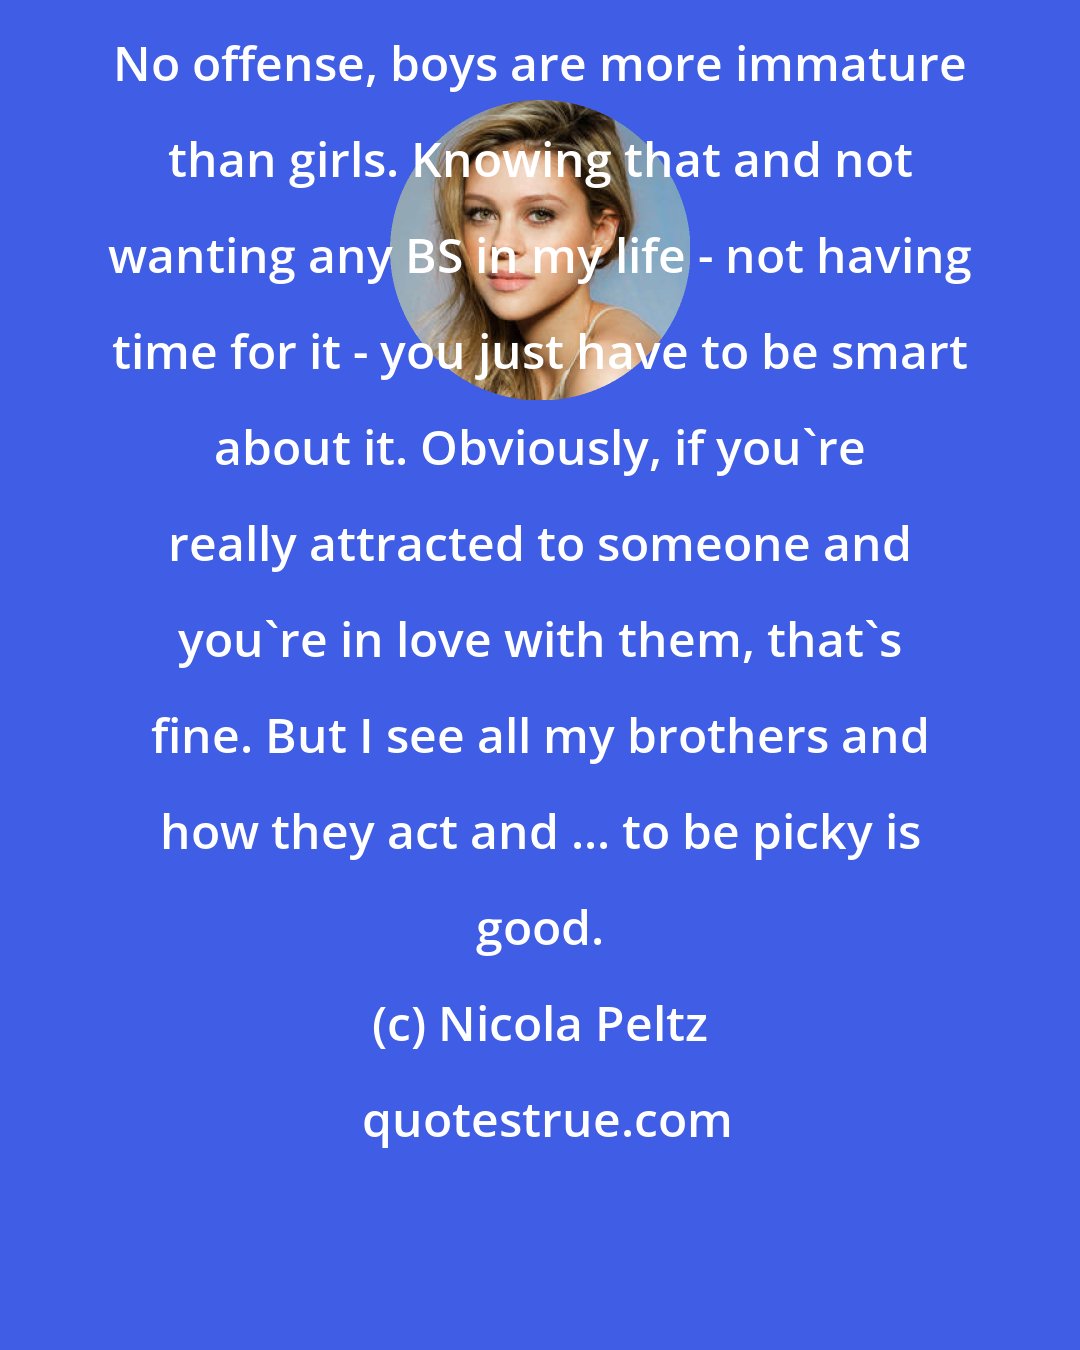 Nicola Peltz: No offense, boys are more immature than girls. Knowing that and not wanting any BS in my life - not having time for it - you just have to be smart about it. Obviously, if you're really attracted to someone and you're in love with them, that's fine. But I see all my brothers and how they act and ... to be picky is good.